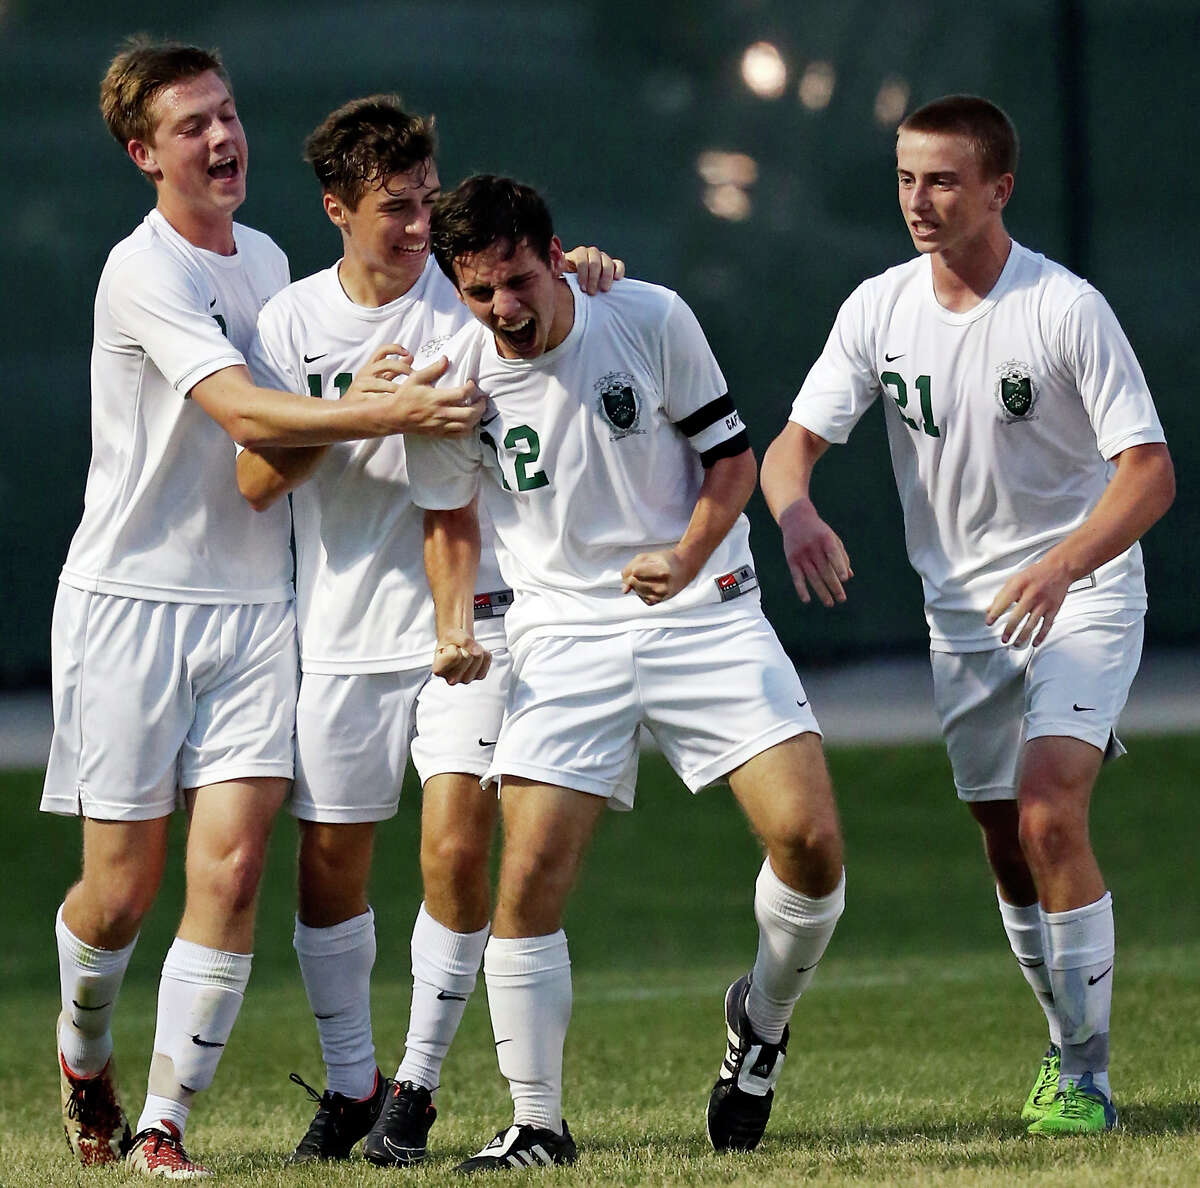 Reagan’s Owen Tuttle (center) celebrates with teammates Nick Rosen (from left), Derek Burris, and Justin Sukow after scoring a goal against Clark during first half action of their Class 6A second-round playoff game on April 2, 2015, at Blossom Soccer Stadium.